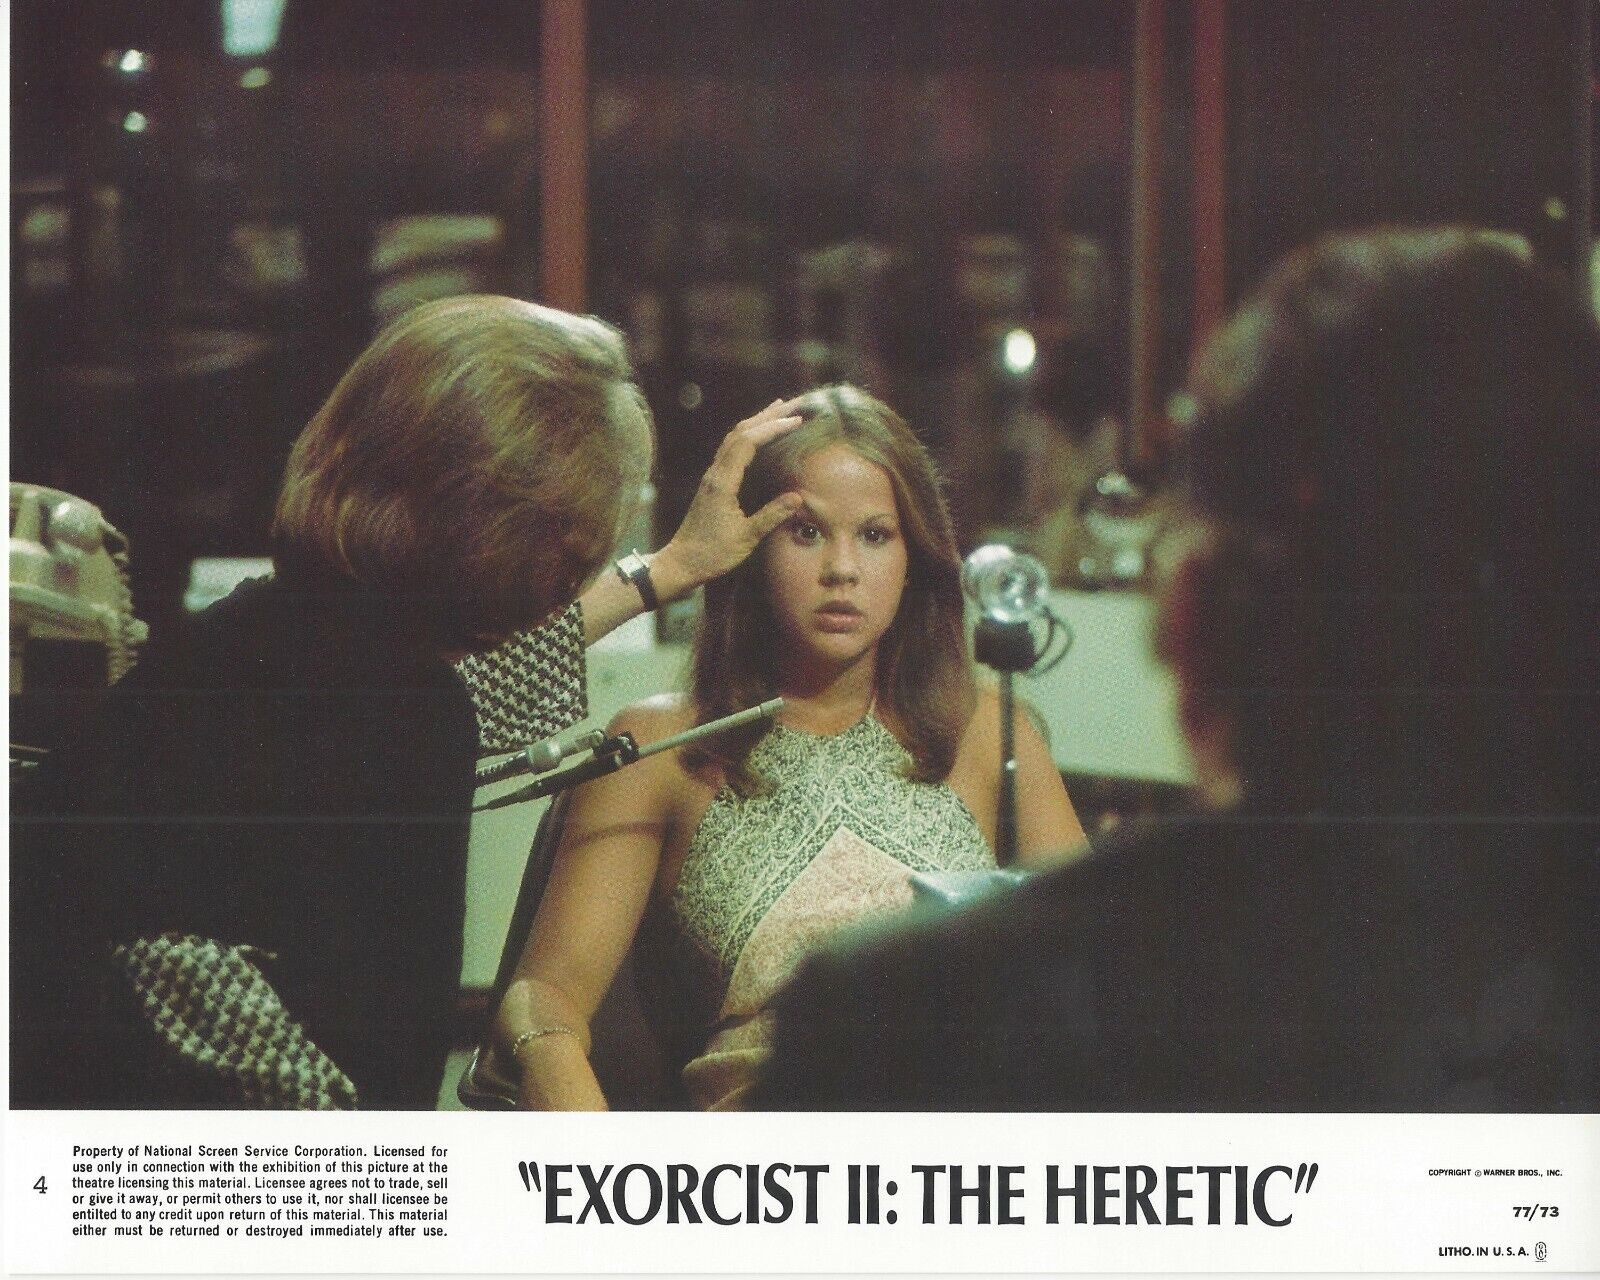 Exorcist II: The Heretic Original 8x10 Lobby Card Poster Photo Poster painting 1977 #4 Blair